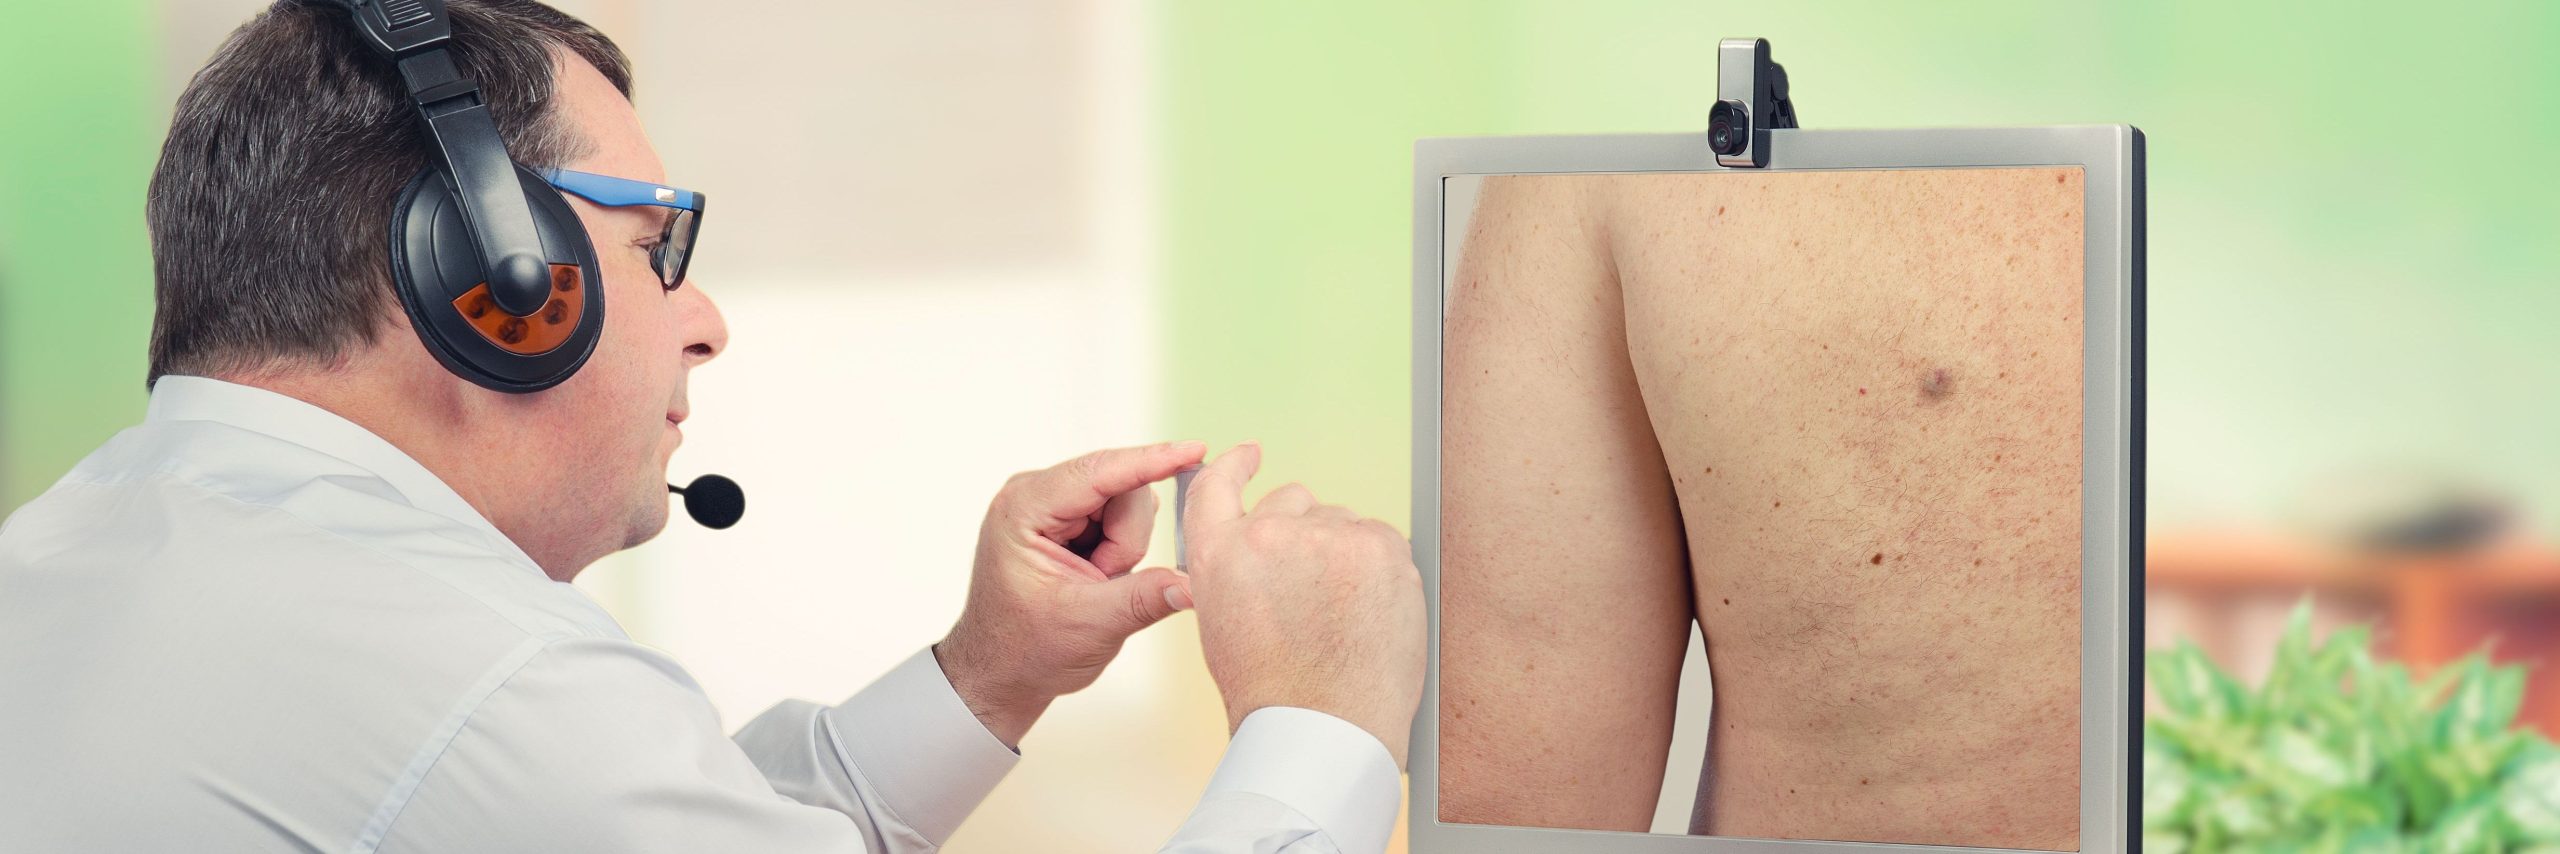 Teledermatology Comparable to In-Person Care for Diagnosing Nonmelanoma Lesions